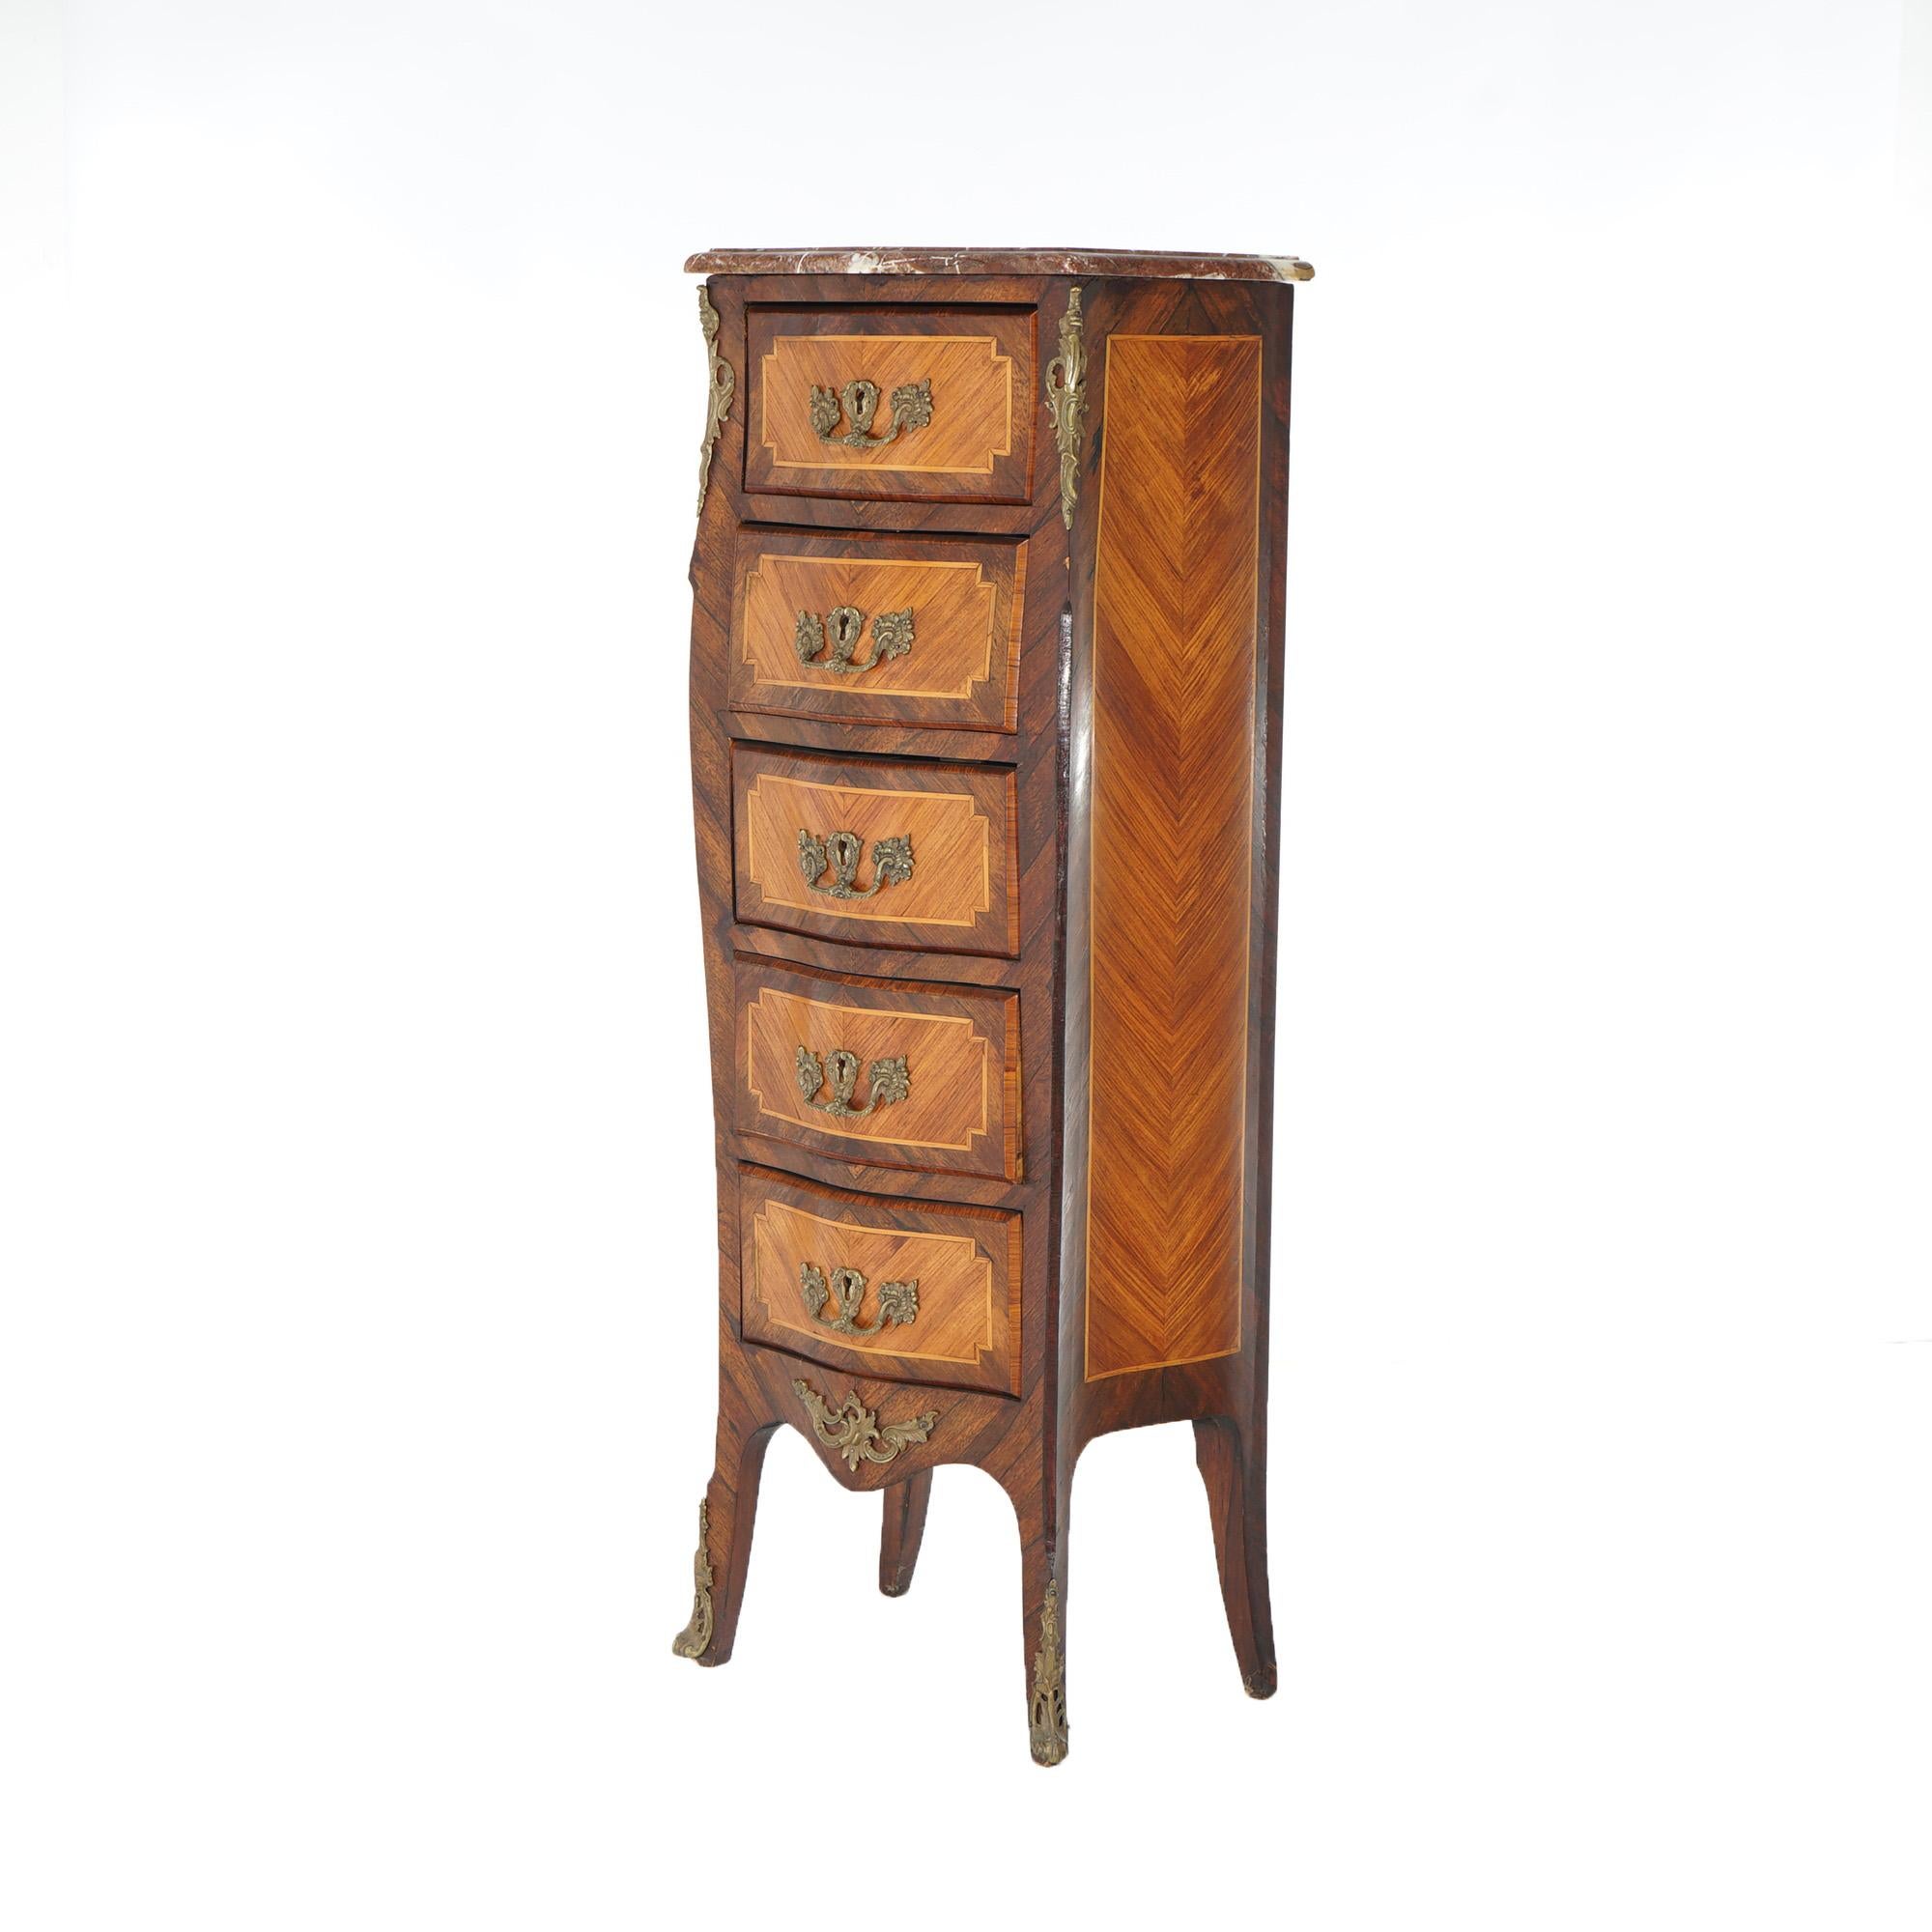 An antique French Louis XIV style lingerie chest offers kingwood and satinwood construction in bombe form and having five drawers, marble top and cast ormolu mounts throughout, 19th century

Measures- 53.5''H x 18.25''W x 13.25''D

Catalogue Note: